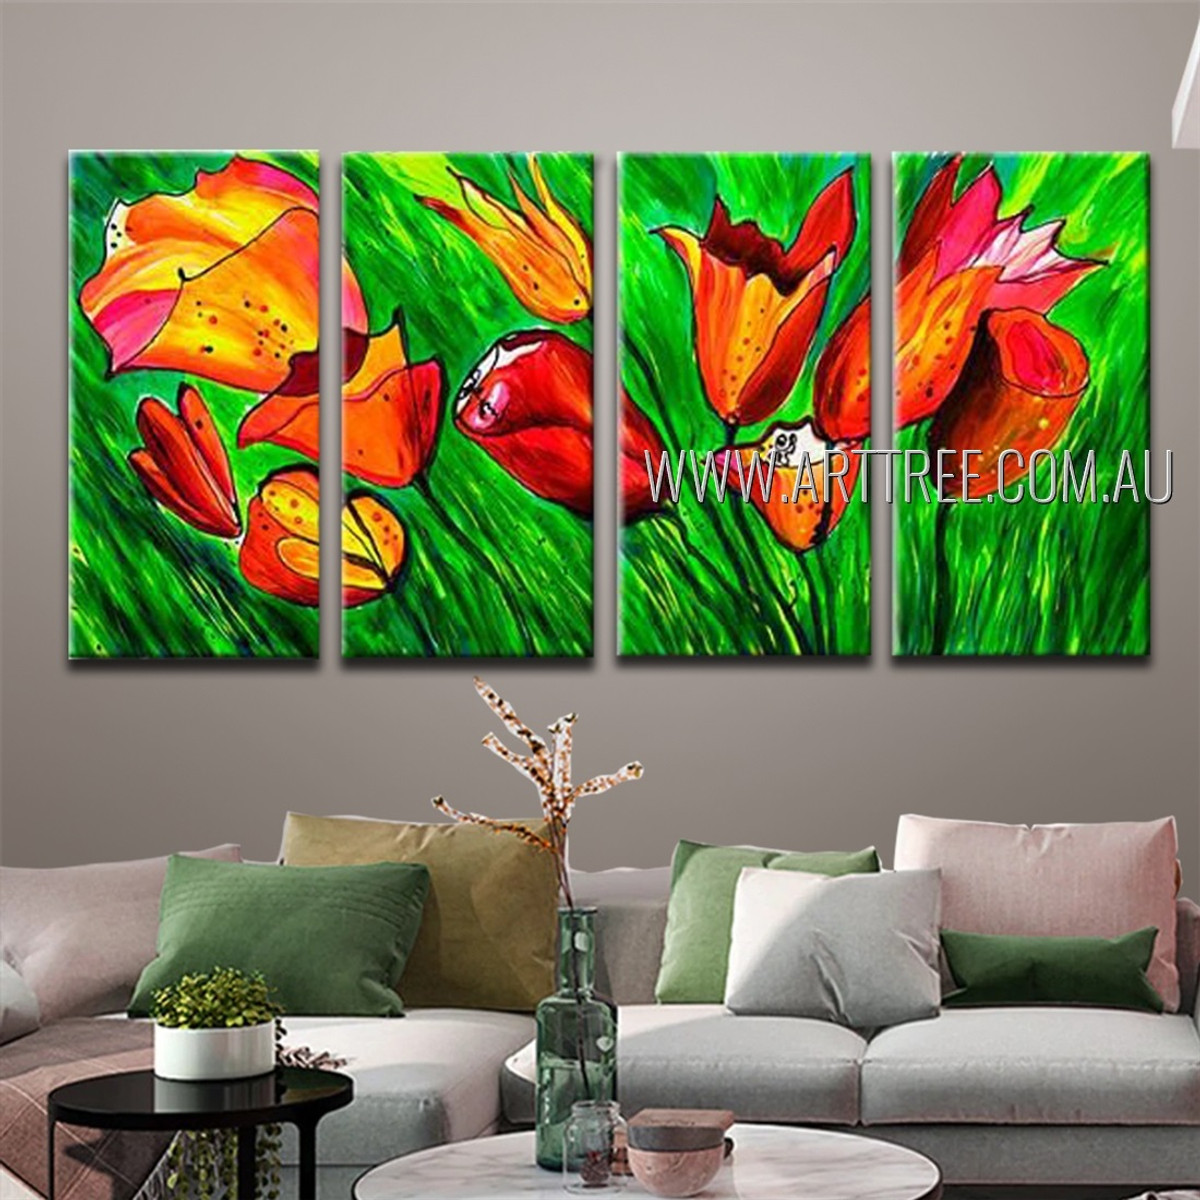 Beautiful Blooms Abstract Floral Modern Handmade Artist 4 Piece Split Oil Paintings Wall Art Set For Room Equipment